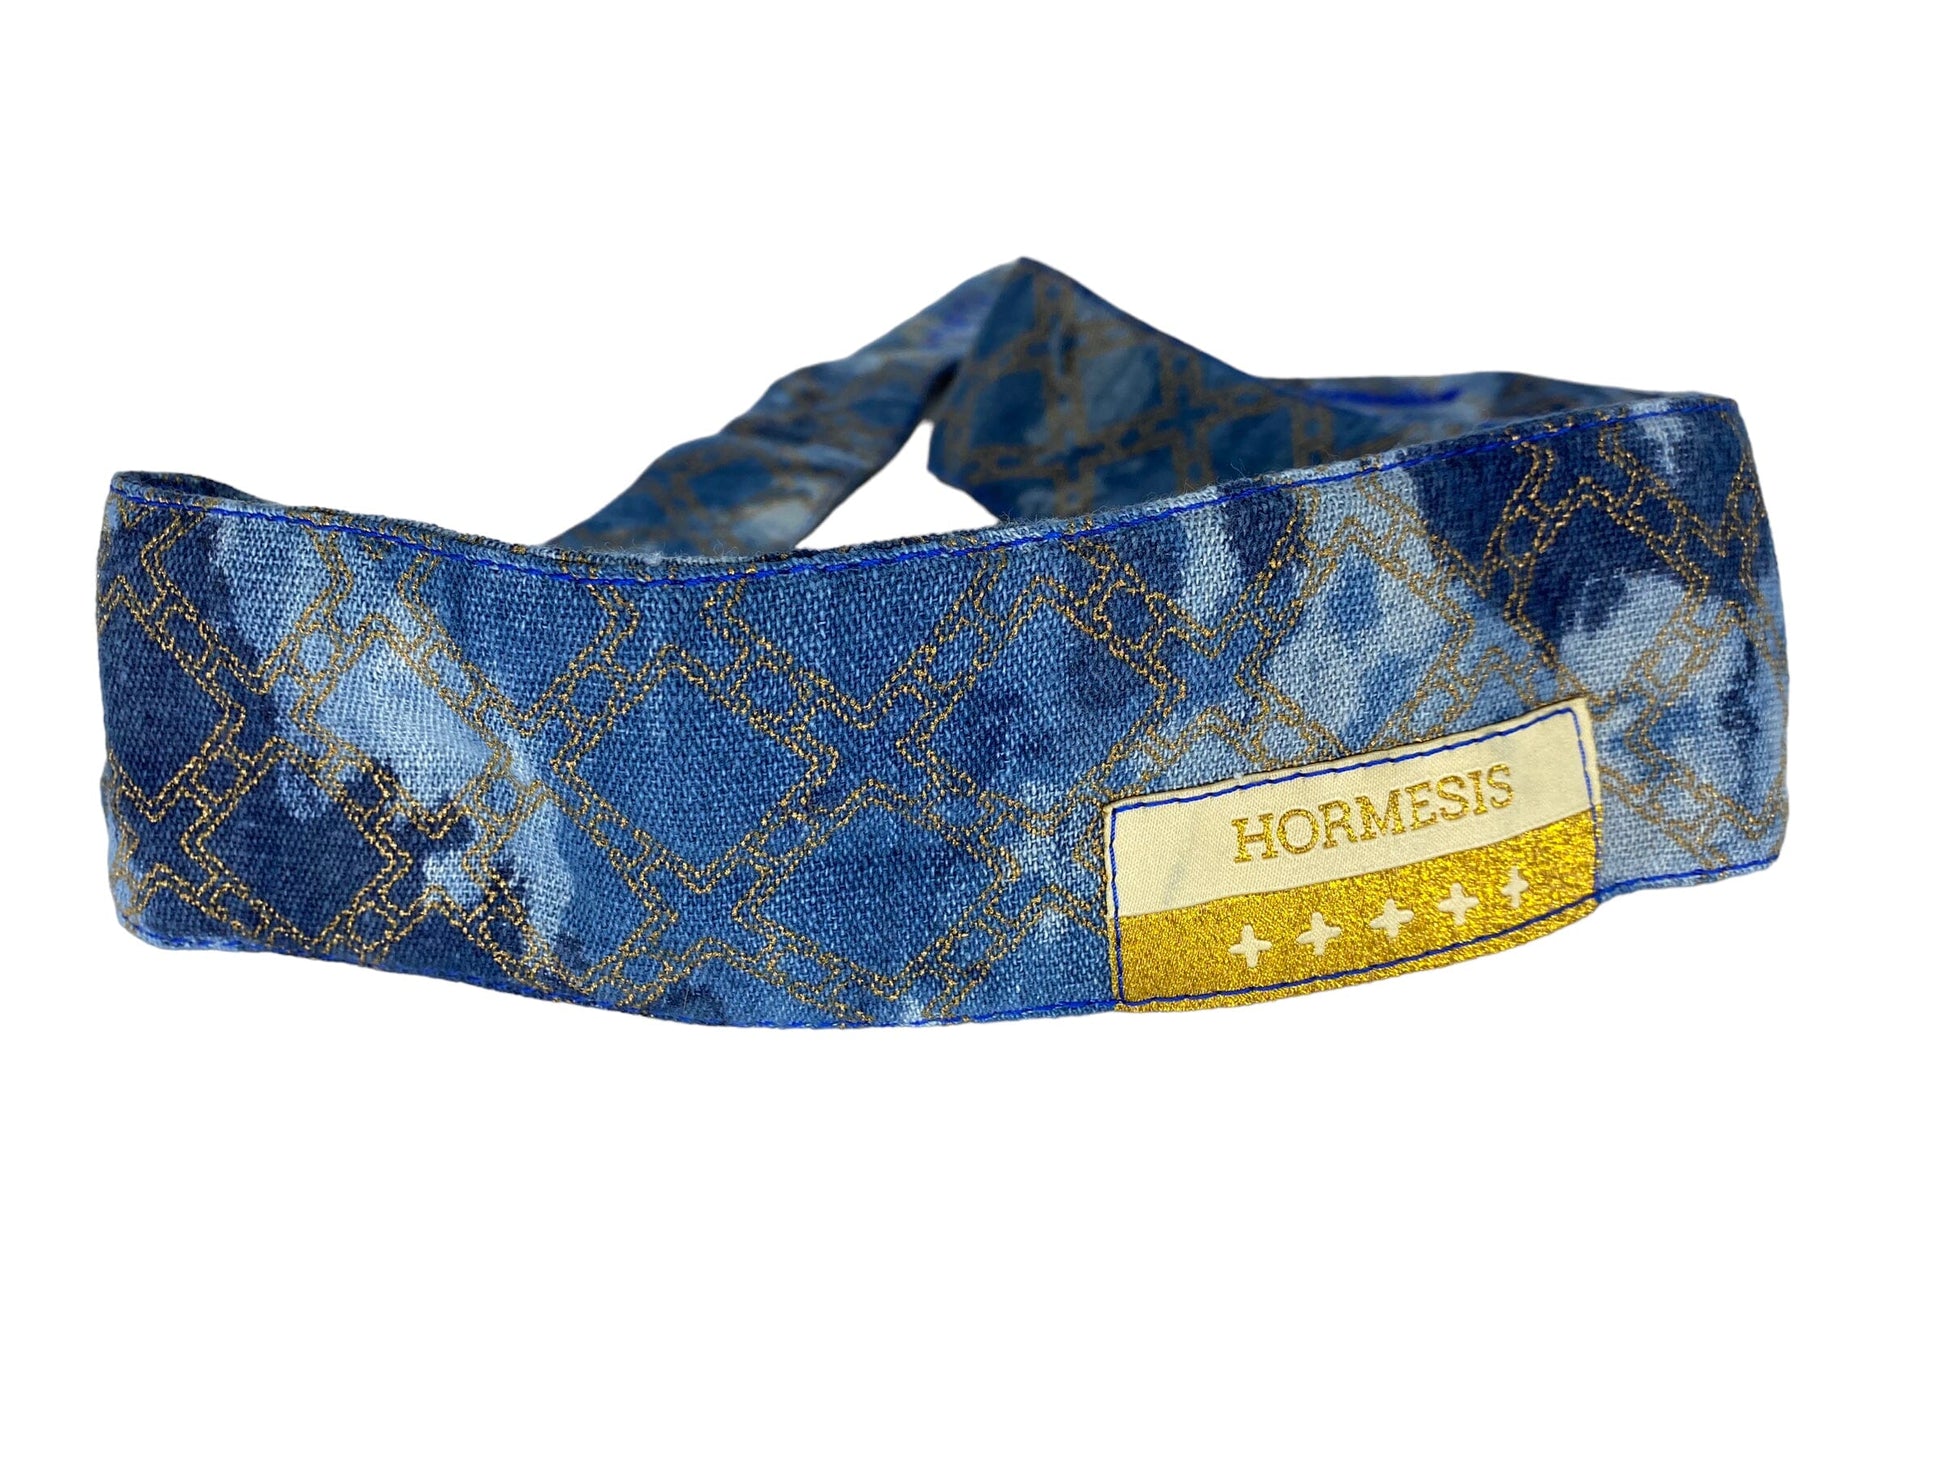 Used Hormesis Headband - The Nick Trutter Series - THE BACKBONE (Gold Tag) 128/292 Paintball Gun from CPXBrosPaintball Buy/Sell/Trade Paintball Markers, Paintball Hoppers, Paintball Masks, and Hormesis Headbands